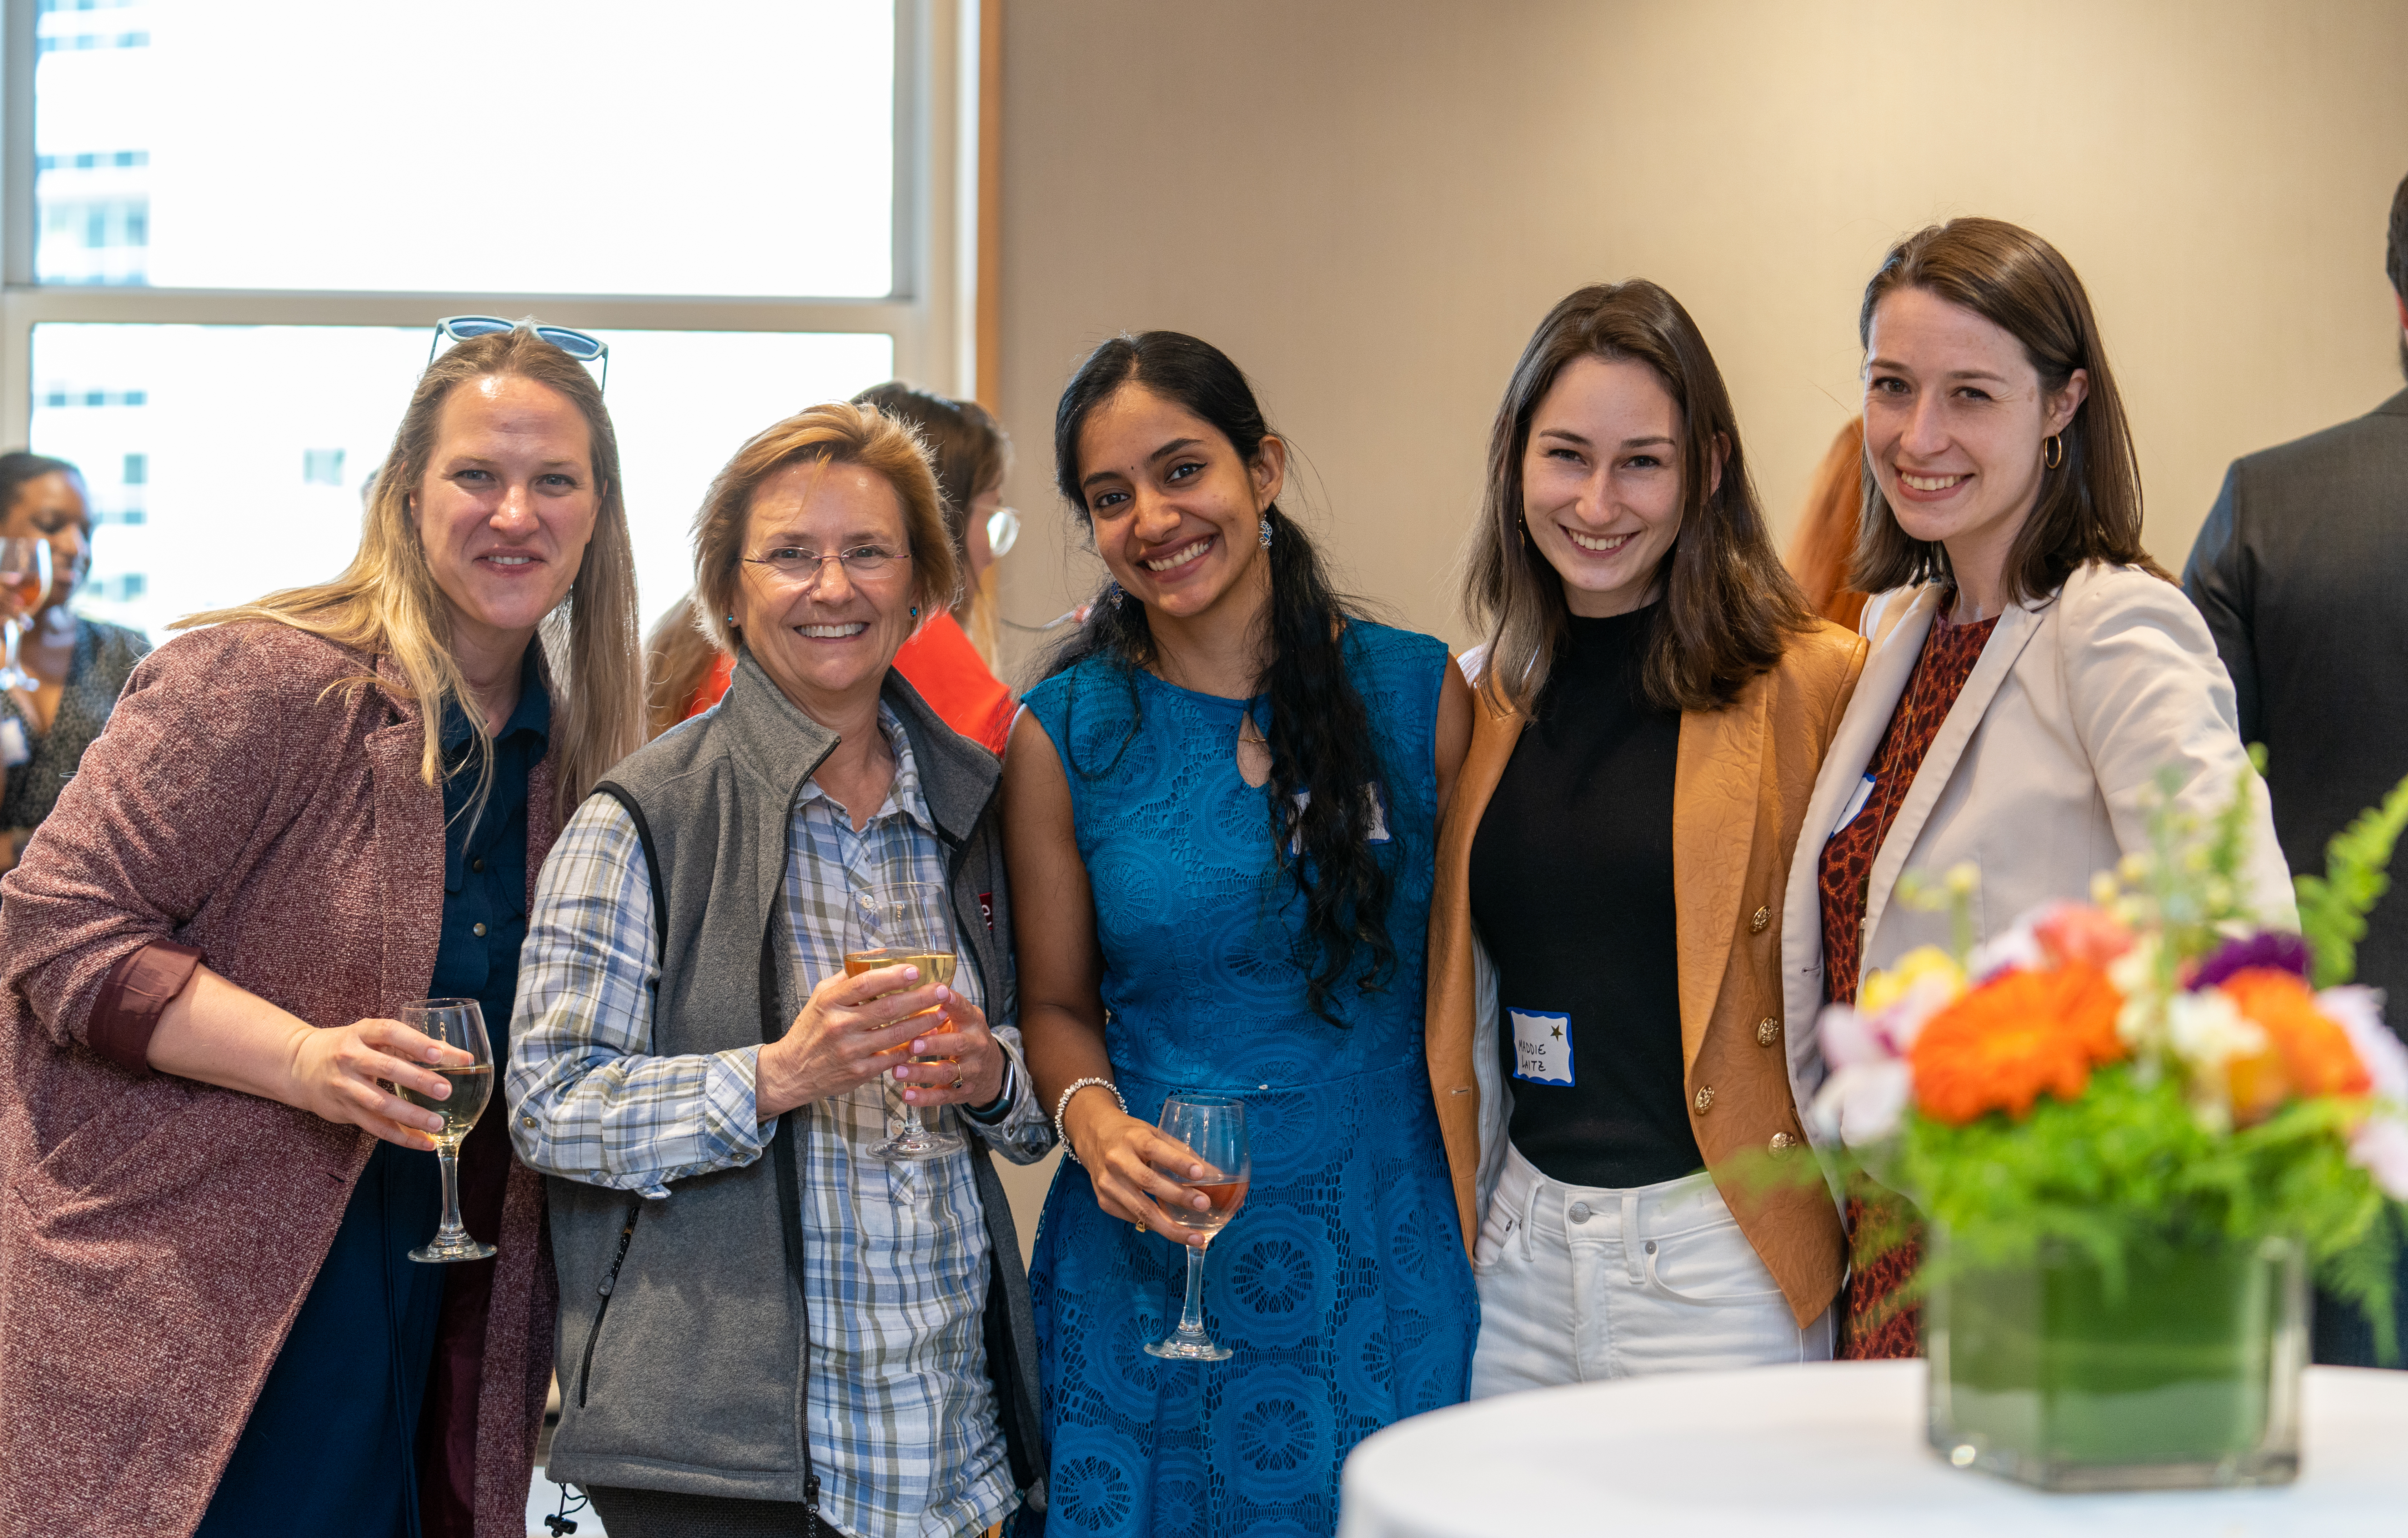 Faculty, staff, and students enjoyed conversation and refreshments at MIT's 2023 Graduate Women of Excellence celebration.